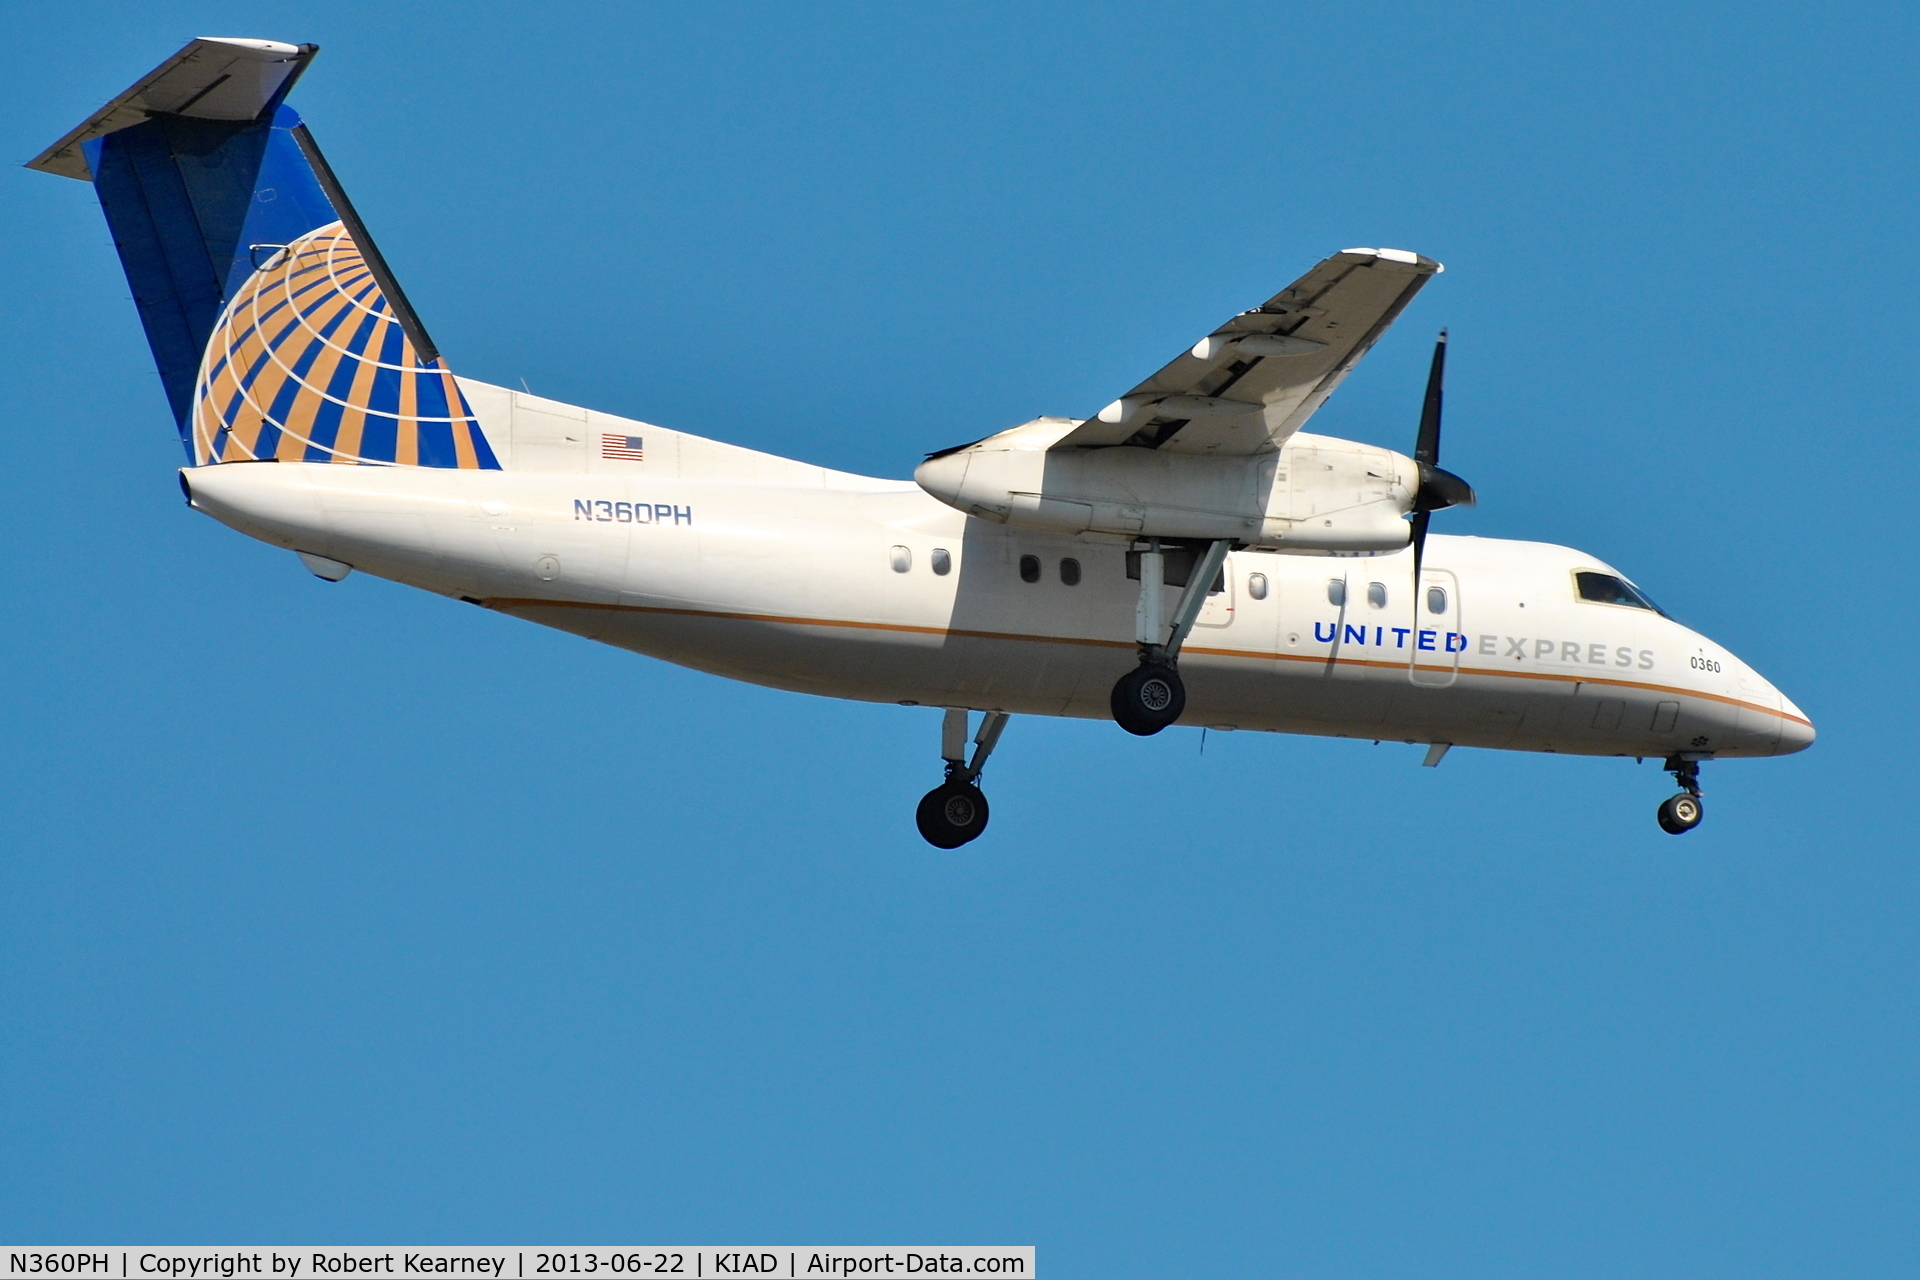 N360PH, 1998 Bombardier DHC-8-202 Dash 8 C/N 515, On finals for r/w 19L